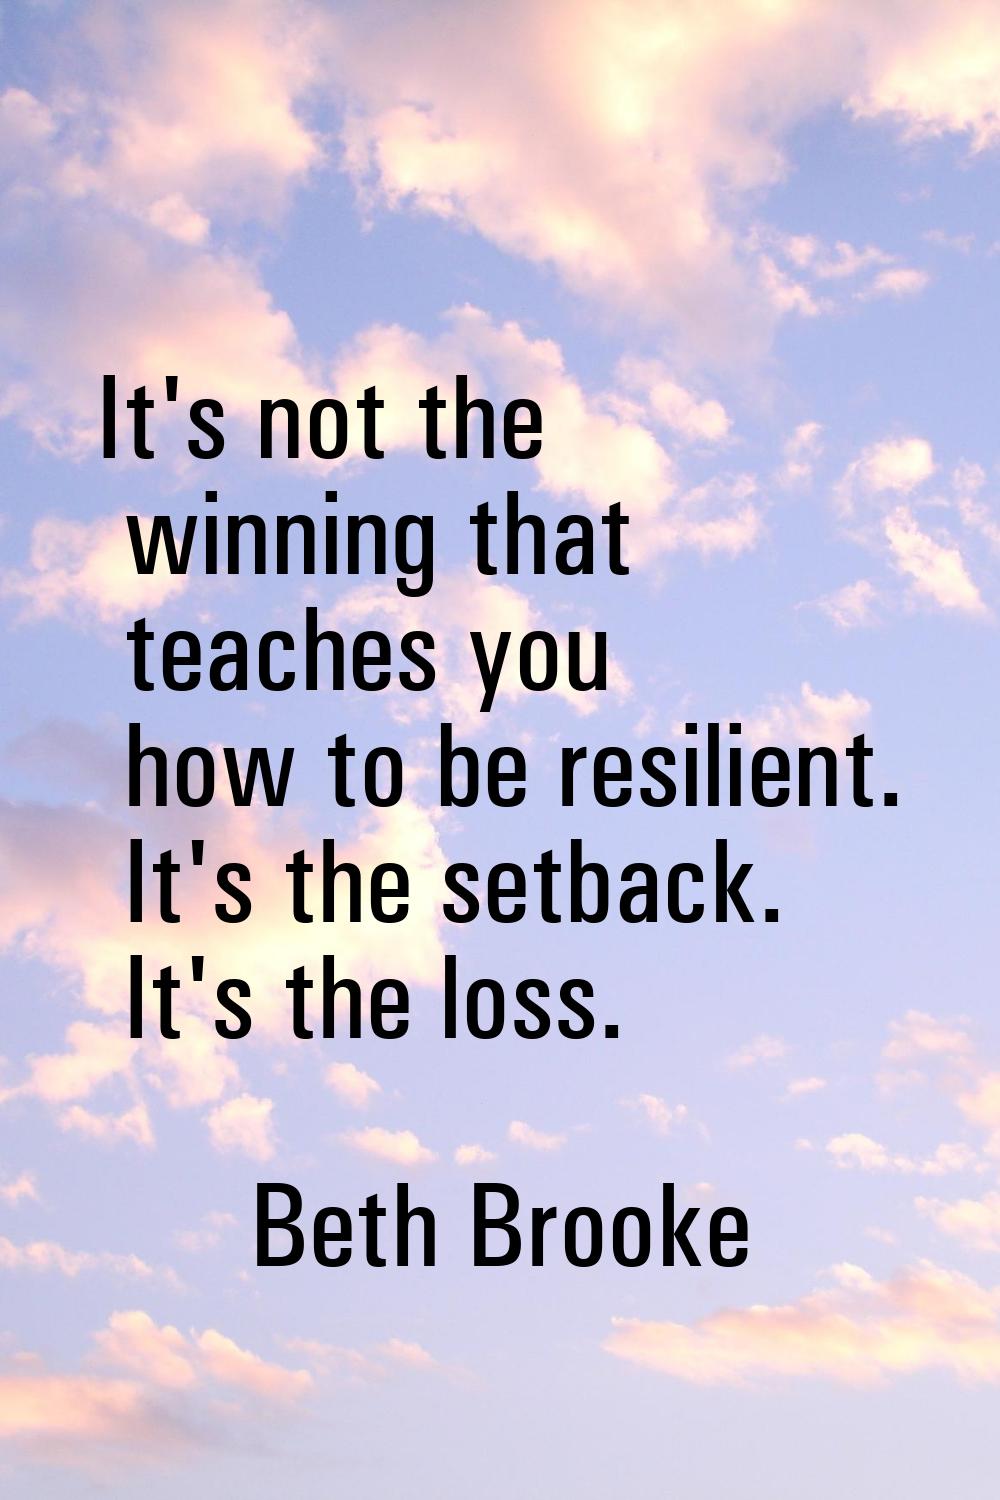 It's not the winning that teaches you how to be resilient. It's the setback. It's the loss.